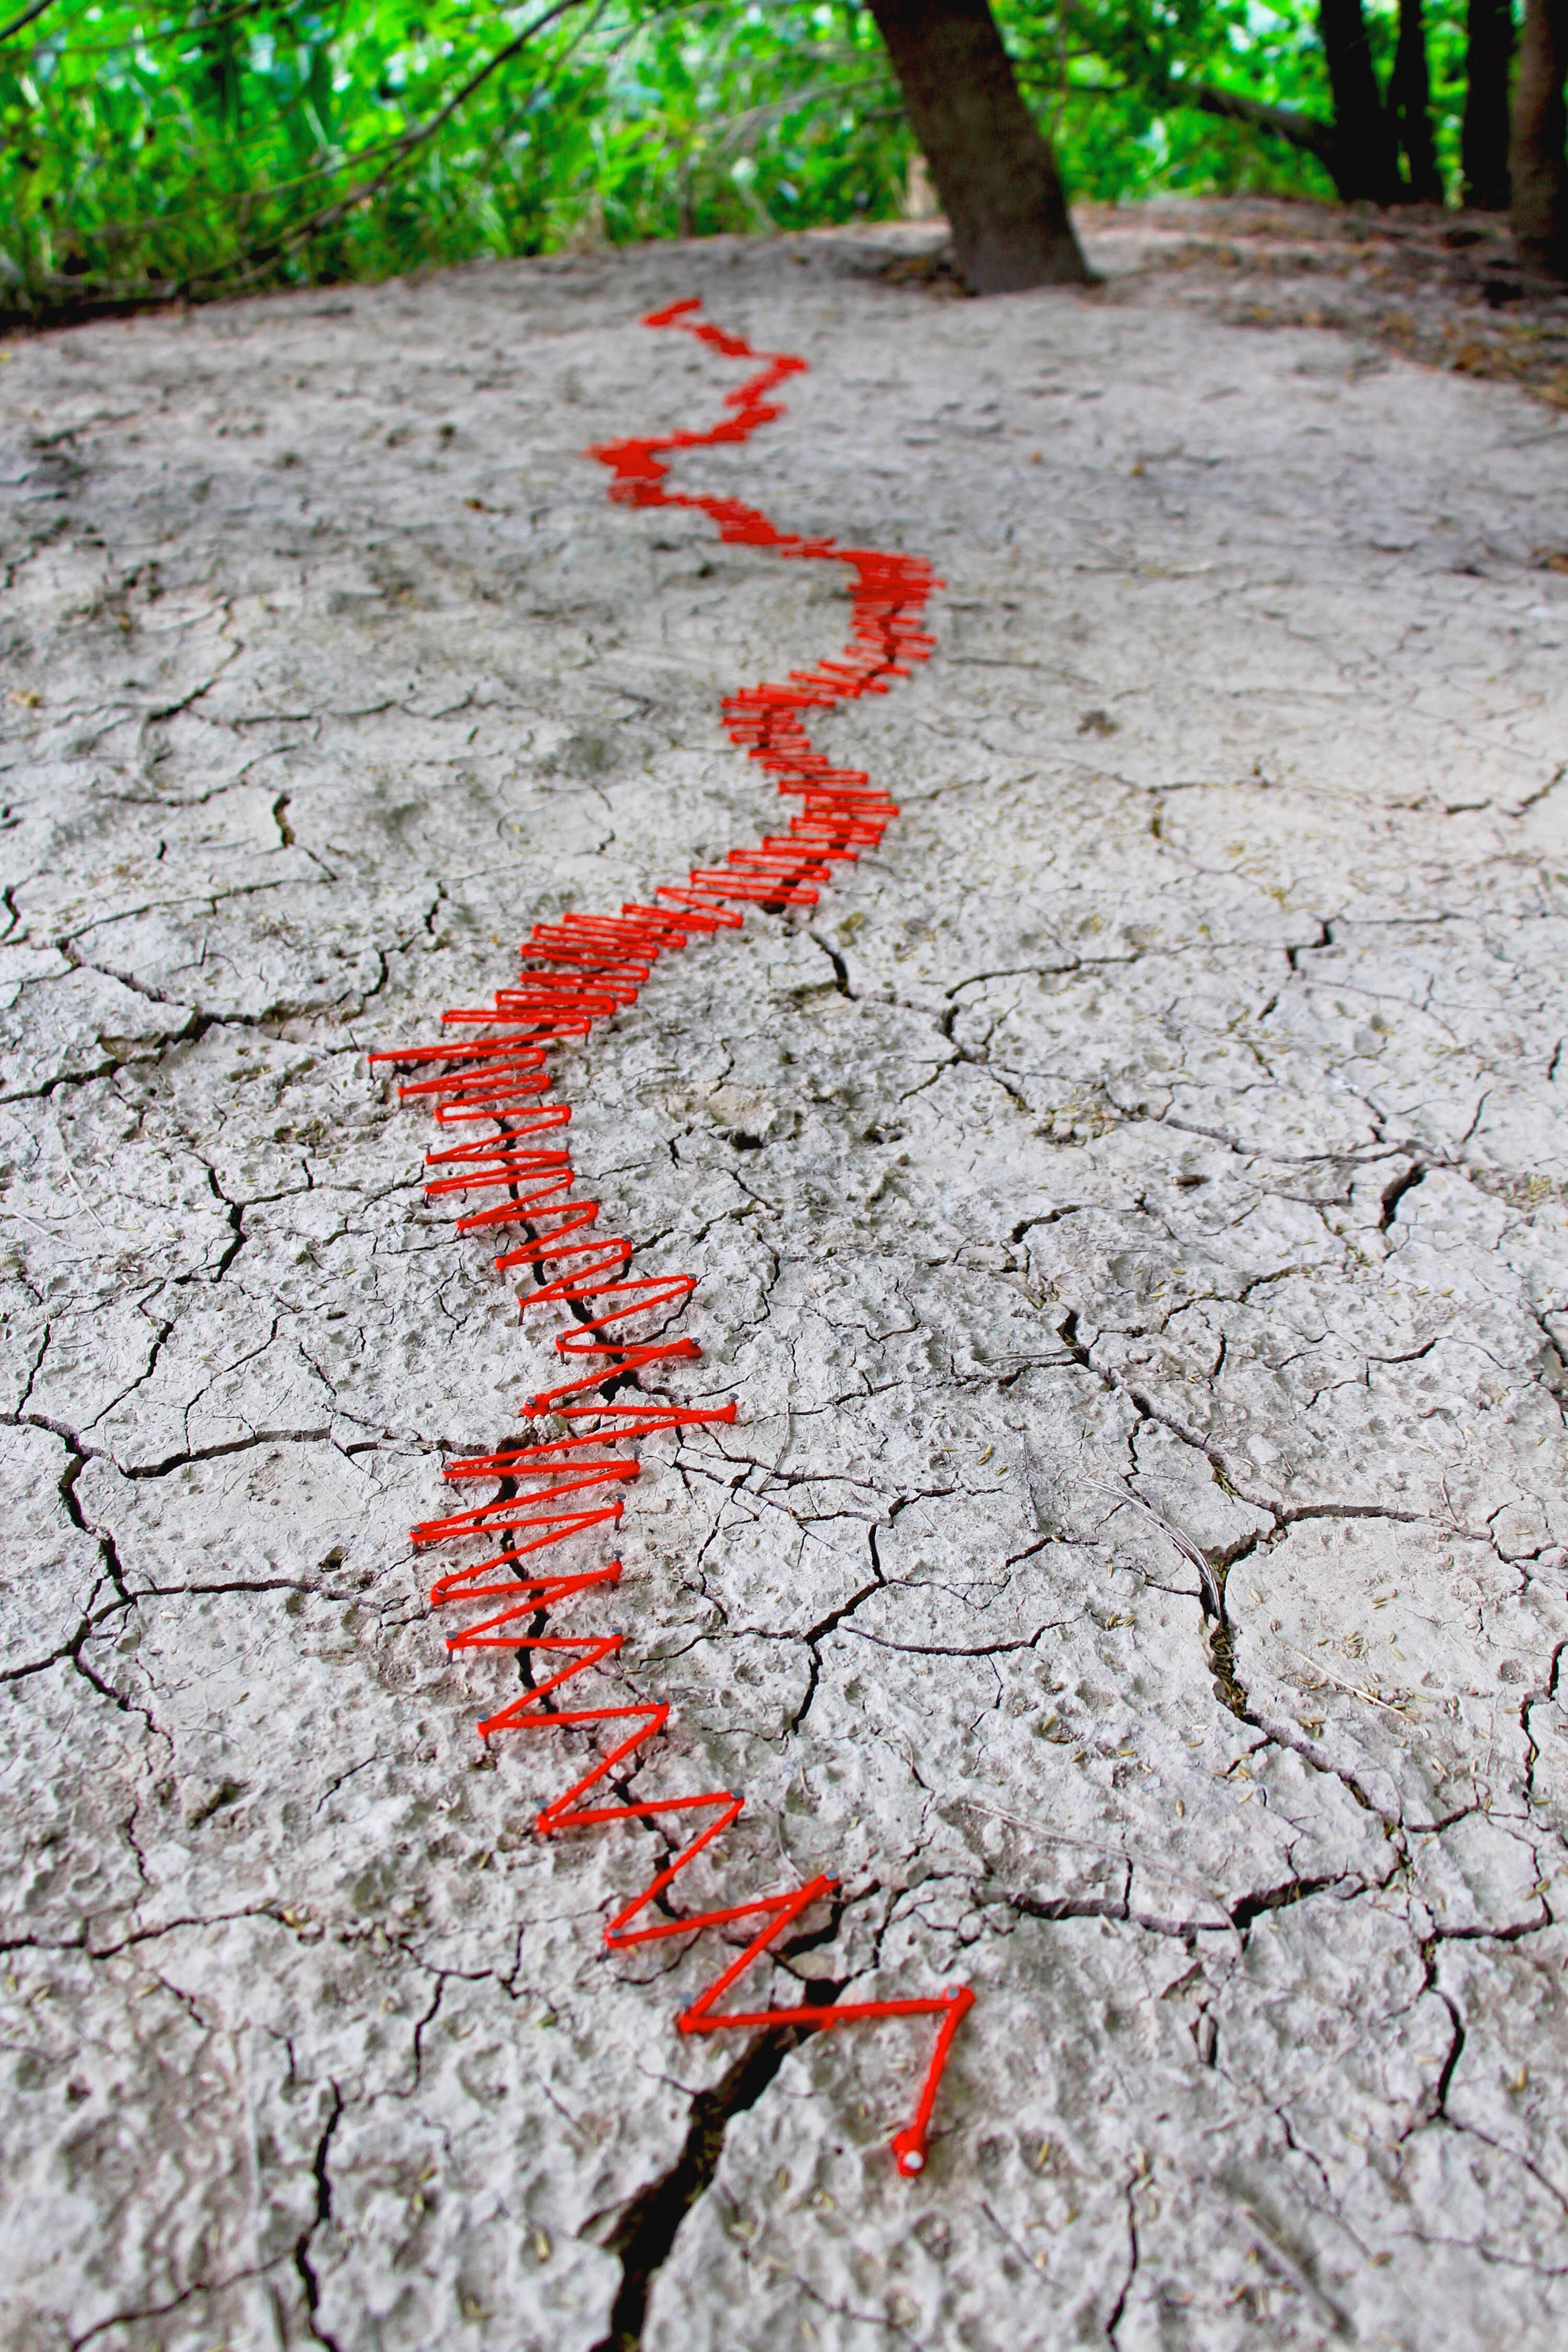 DRY earth cracked and seemingly sewed together with a red zig zag yarn with green leaves and tree stumps in a distance.